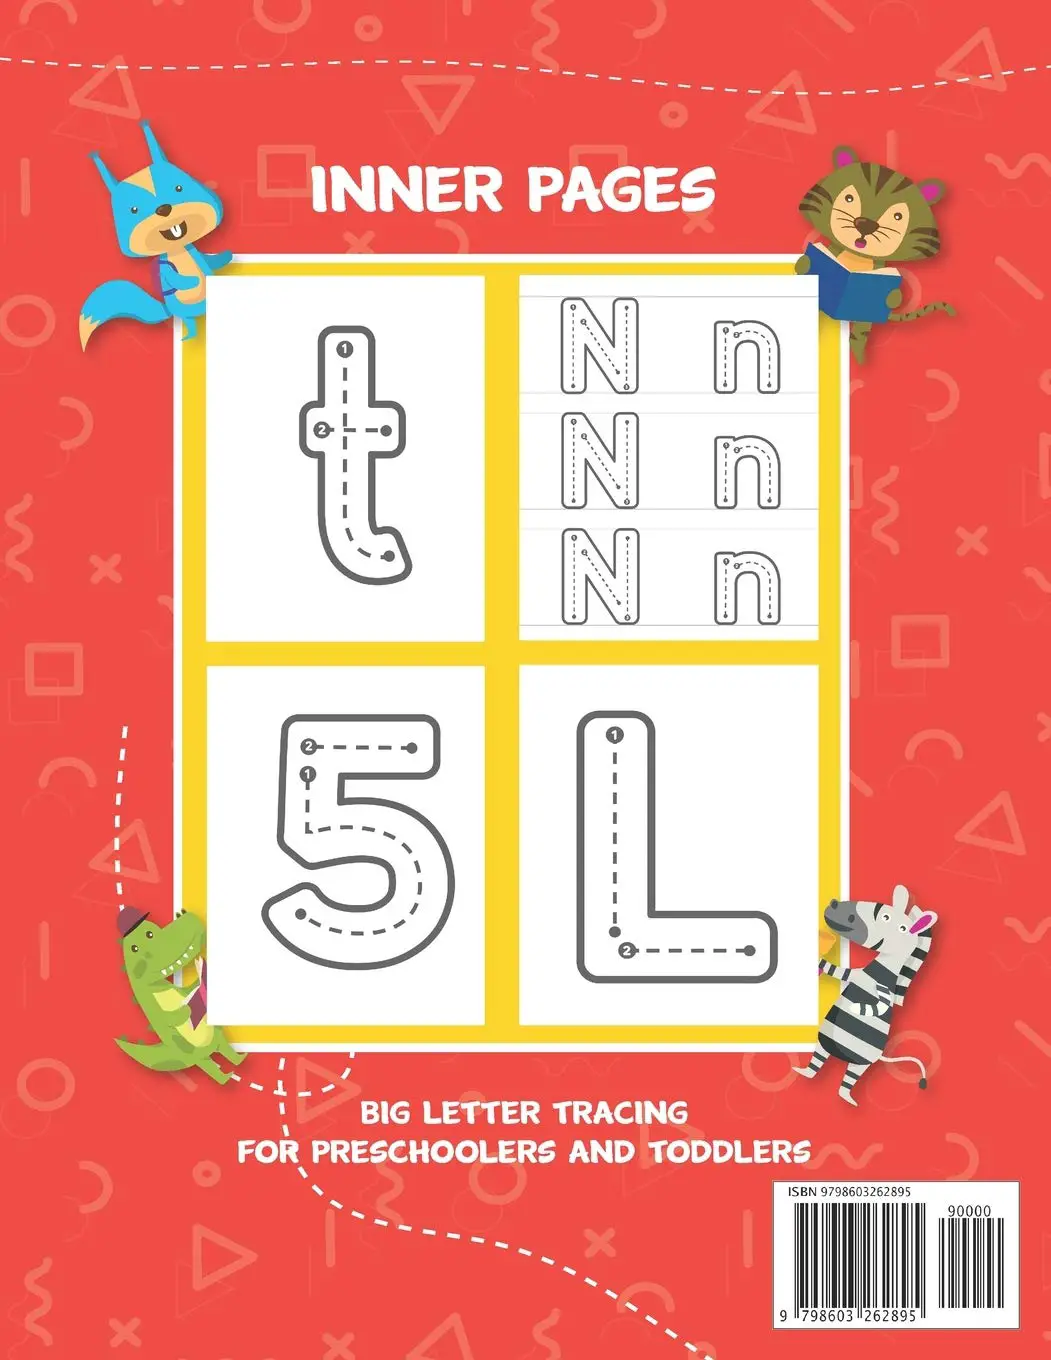 BIG Letter Tracing for Preschoolers and Toddlers ages 2-4: Homeschool Preschool Learning Activities for 3 year olds     Paperback – January 29, 2020